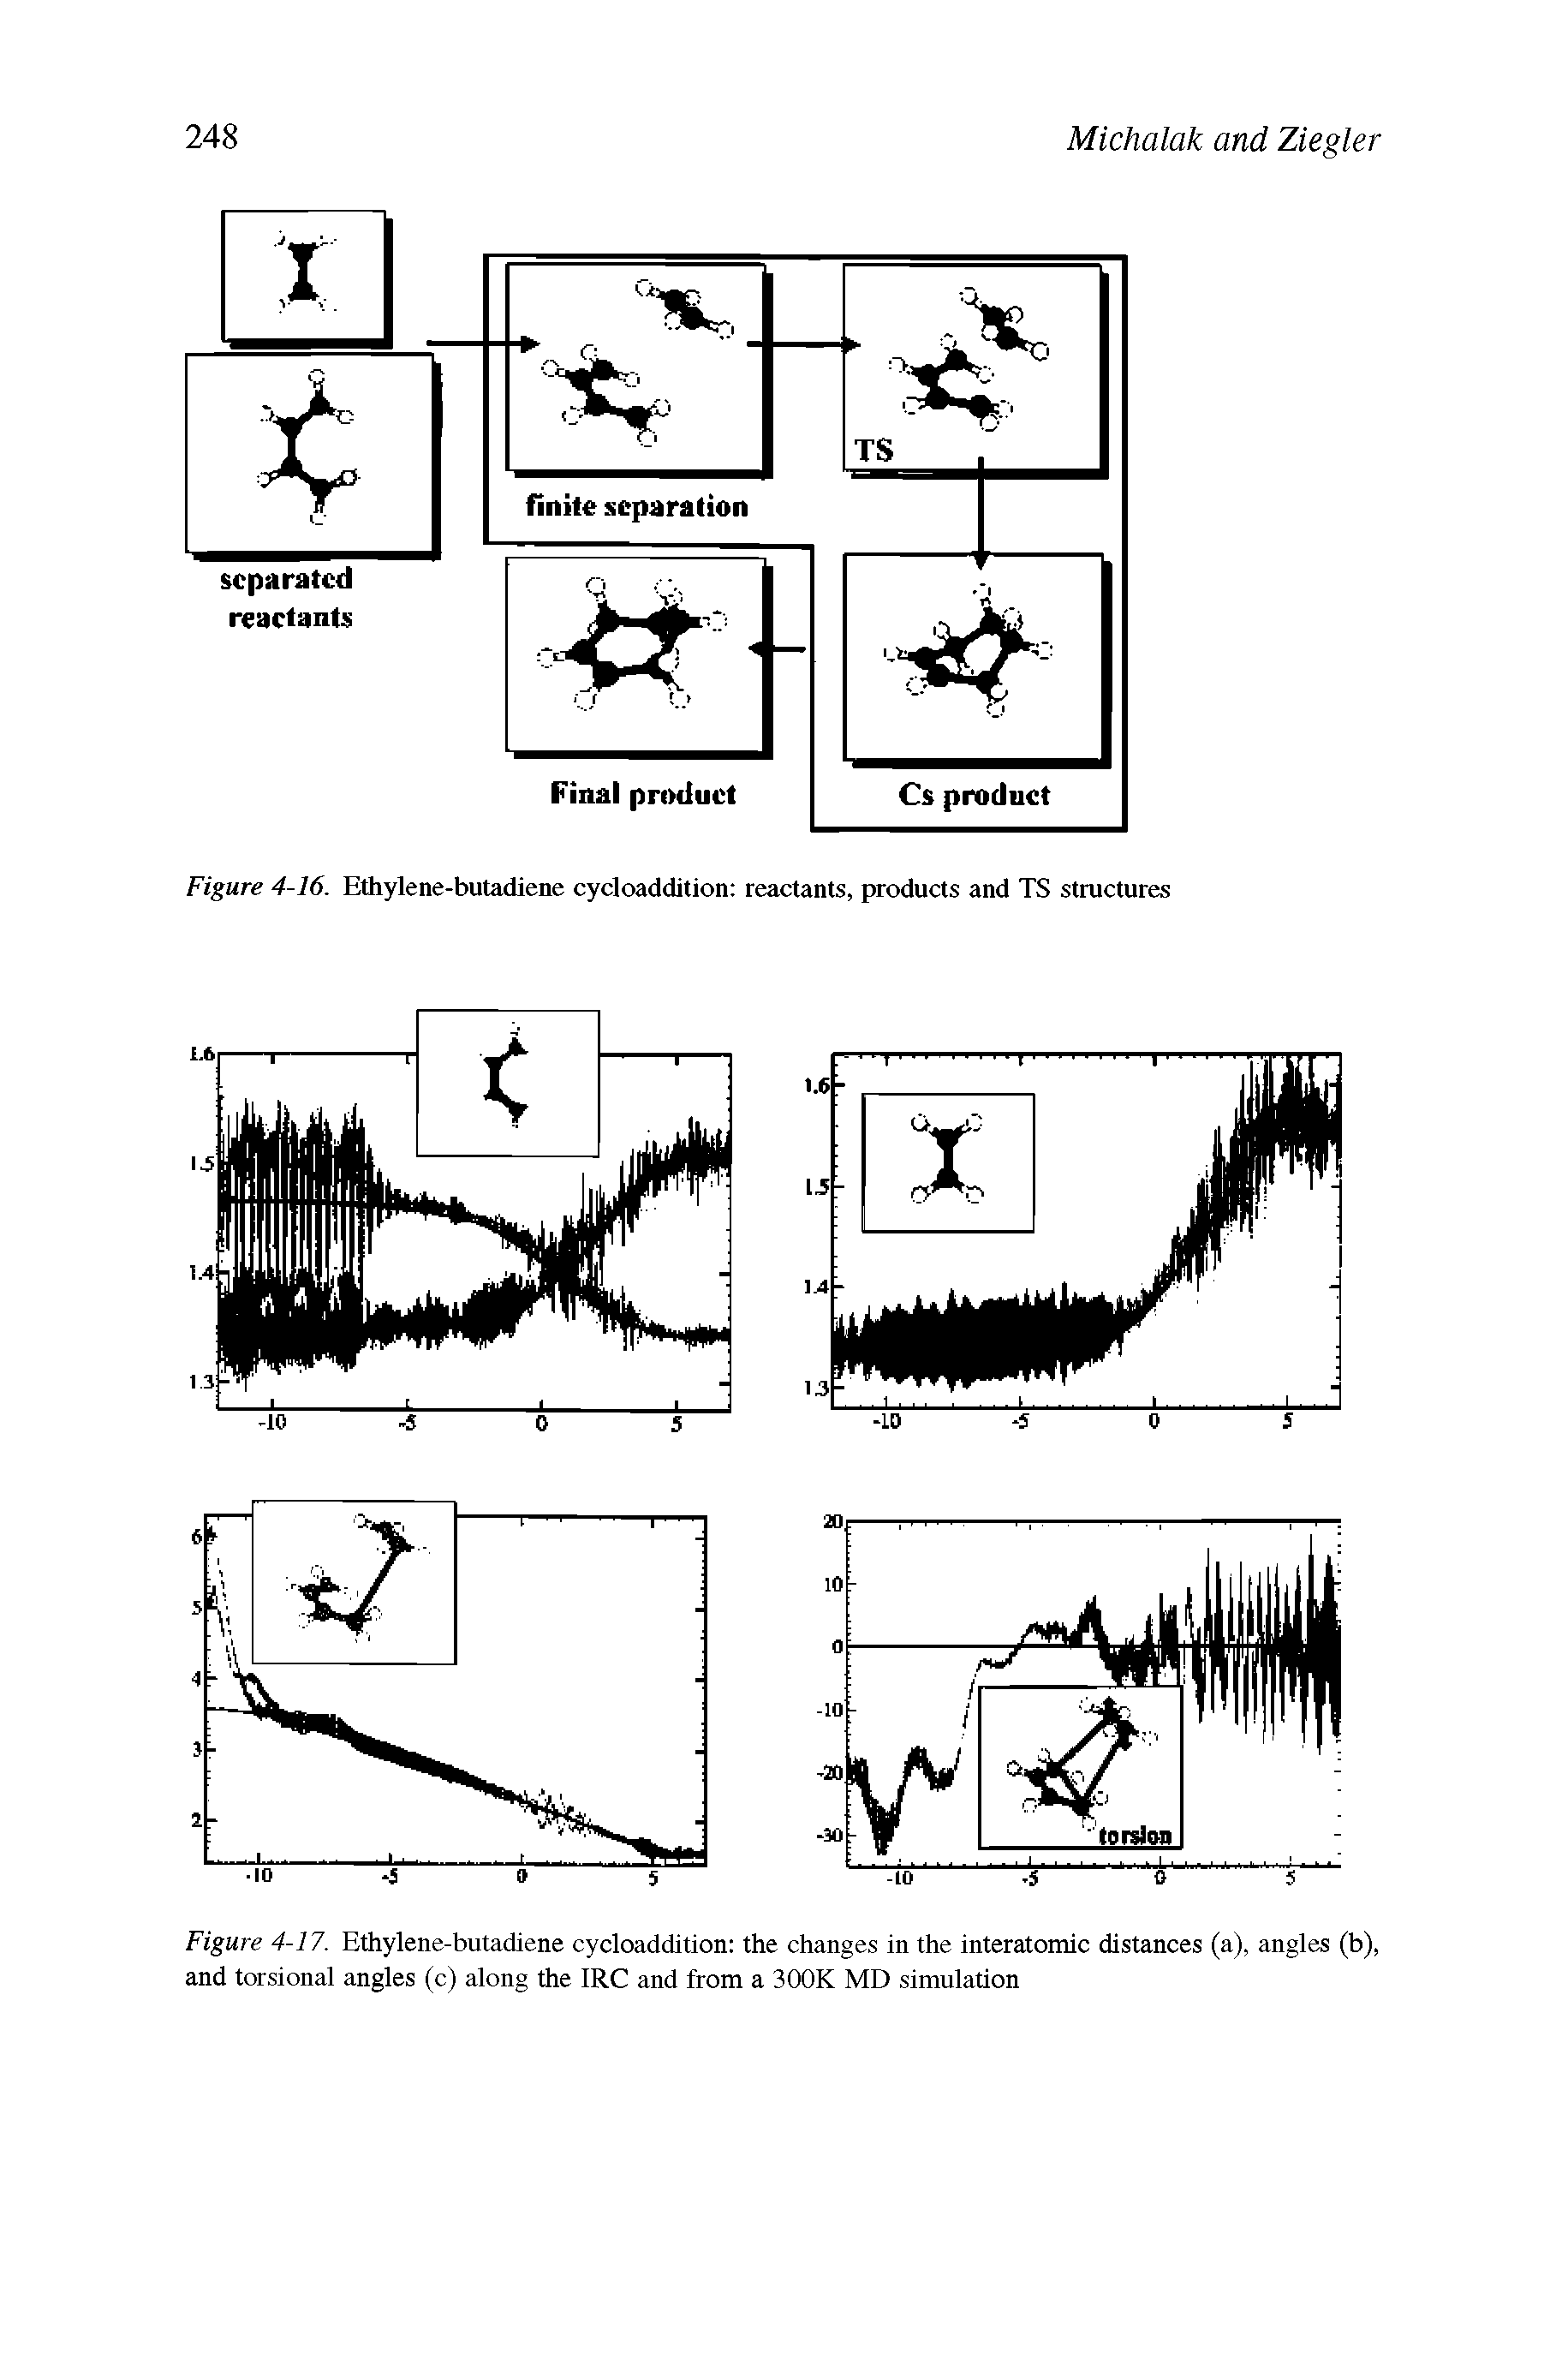 Figure 4-17. Ethylene-butadiene cycloaddition the changes in the interatomic distances (a), angles (b), and torsional angles (c) along the IRC and from a 300K MD simulation...